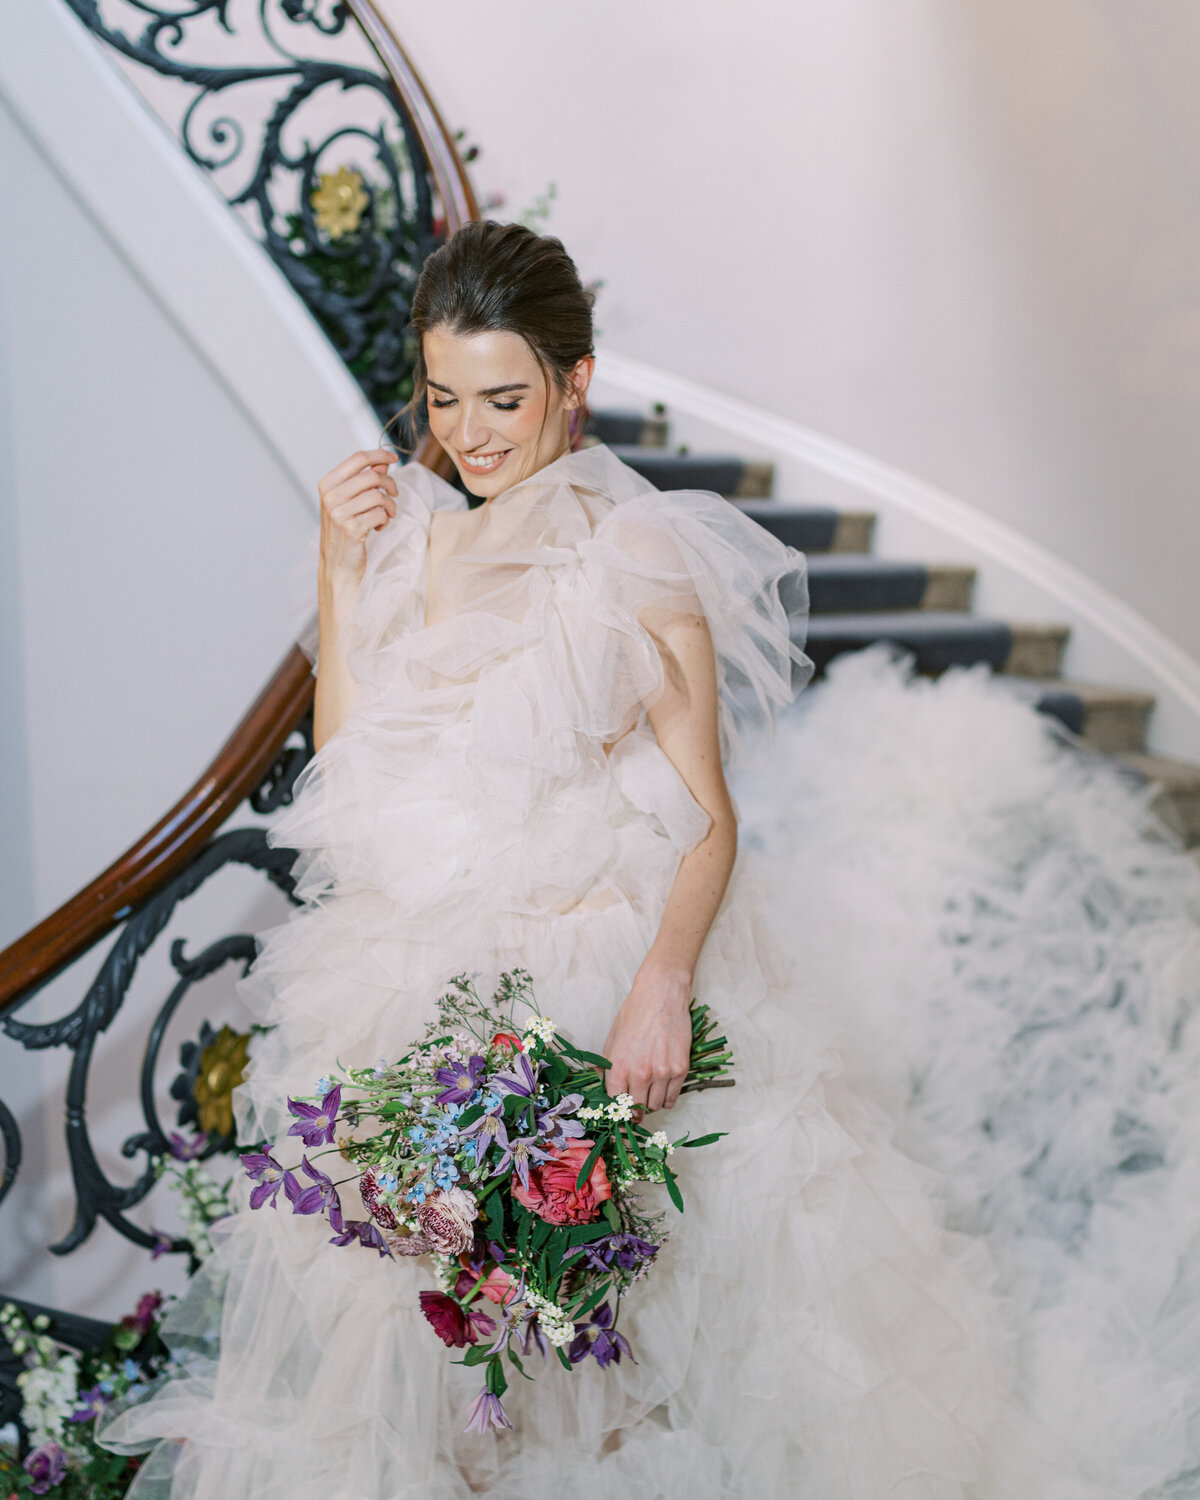 Bridal portrait in white tulle dress with colourful bouquet at London wedding